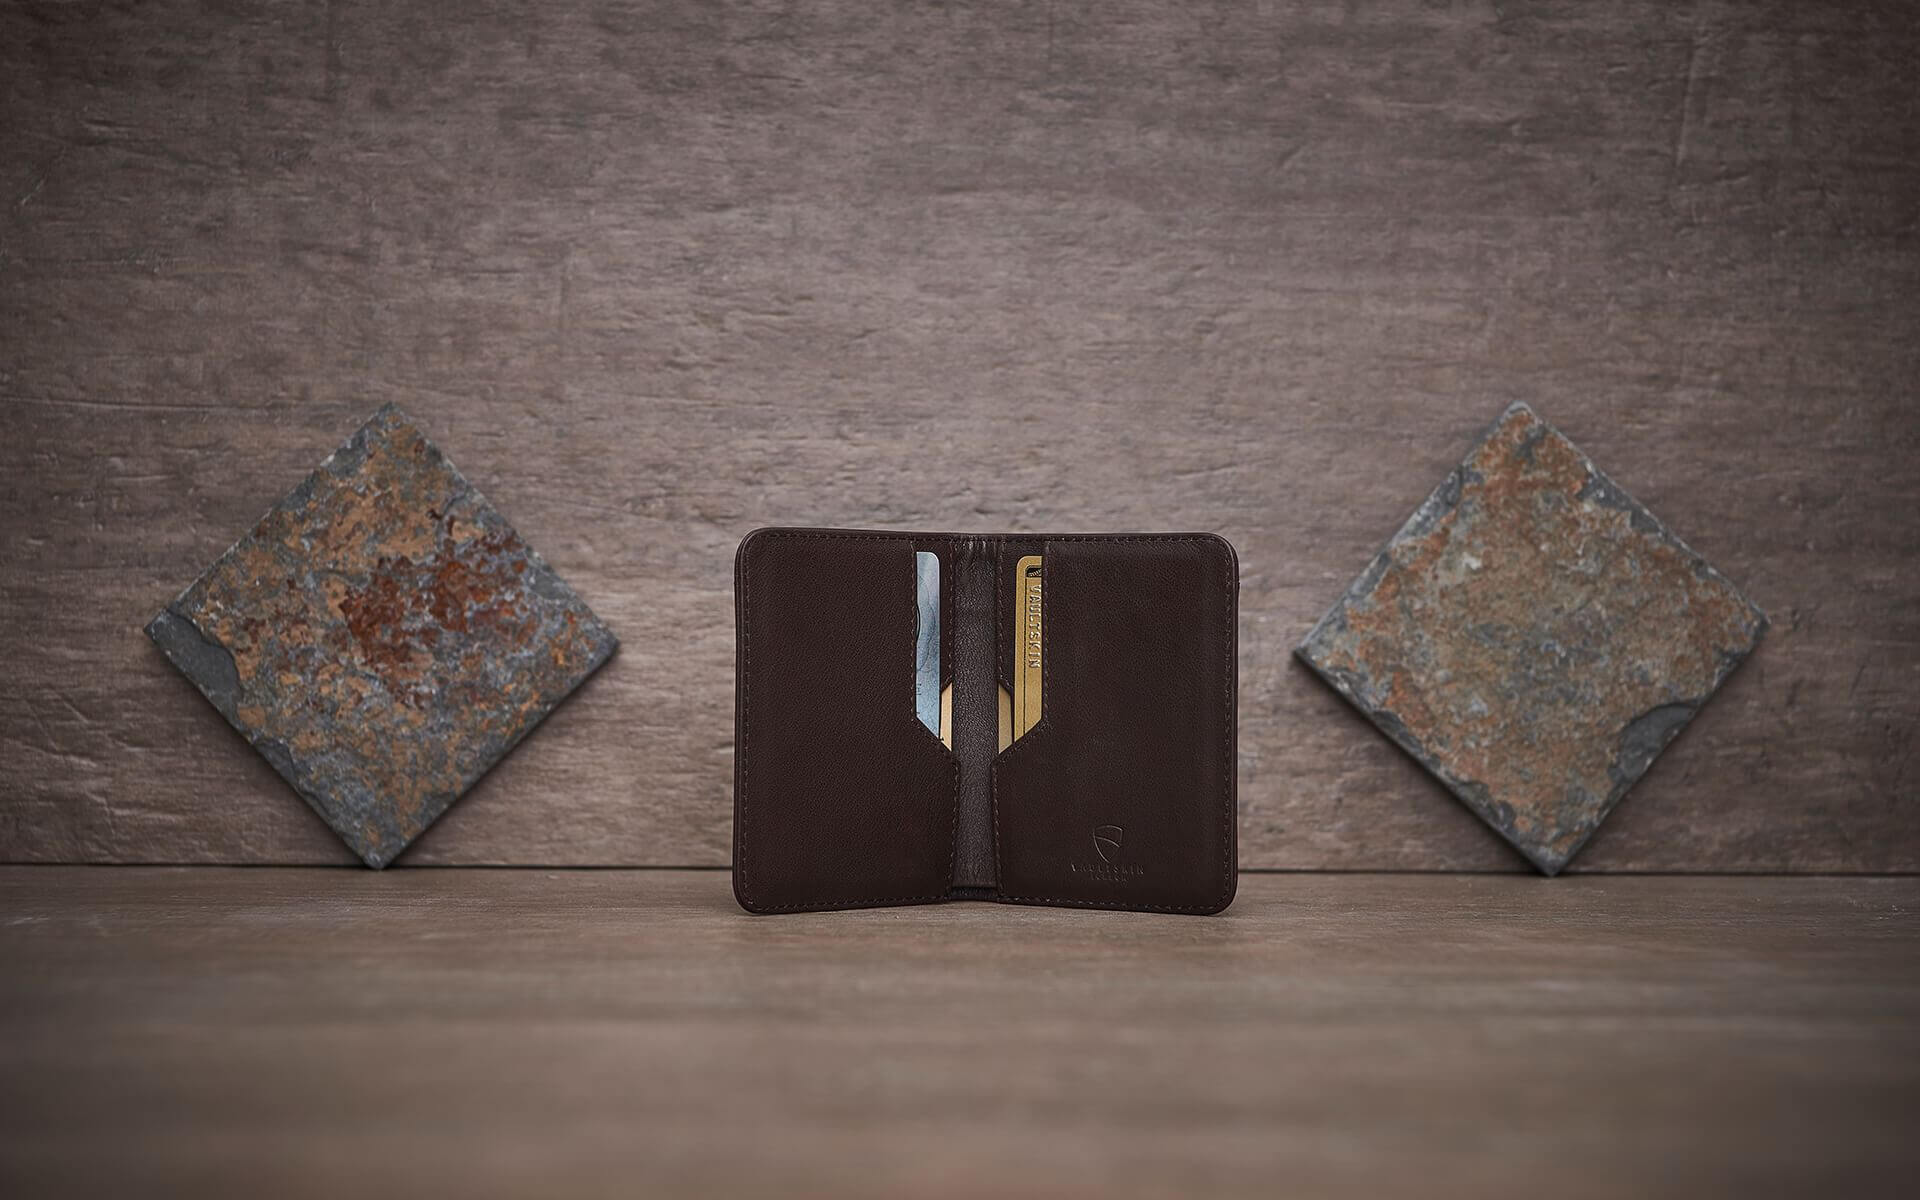 Detailed view of the Vaultskin CITY brown wallet, displaying the fine Italian leather and meticulous stitching for enduring elegance